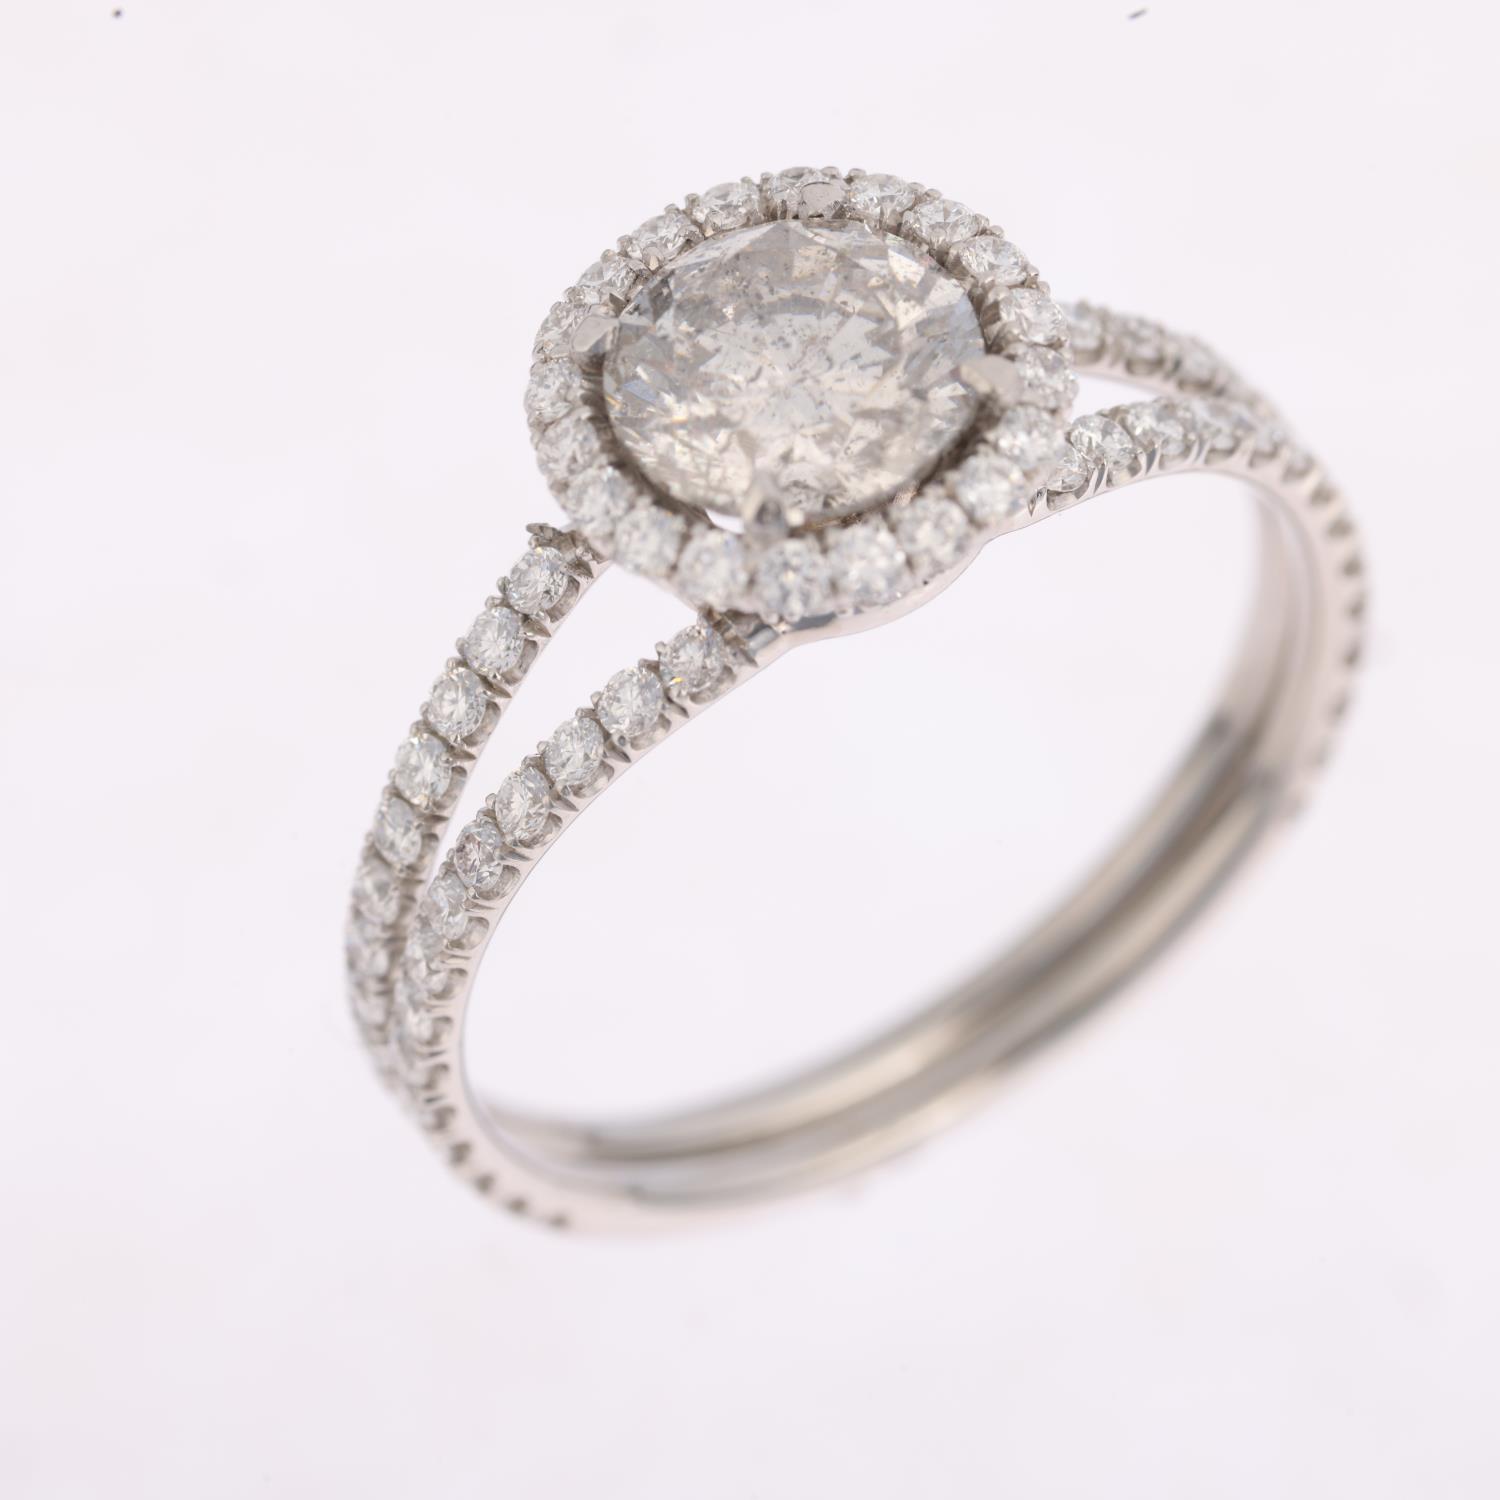 A modern diamond halo cluster ring, centrally set with 1ct modern round brilliant-cut diamond - Image 2 of 4